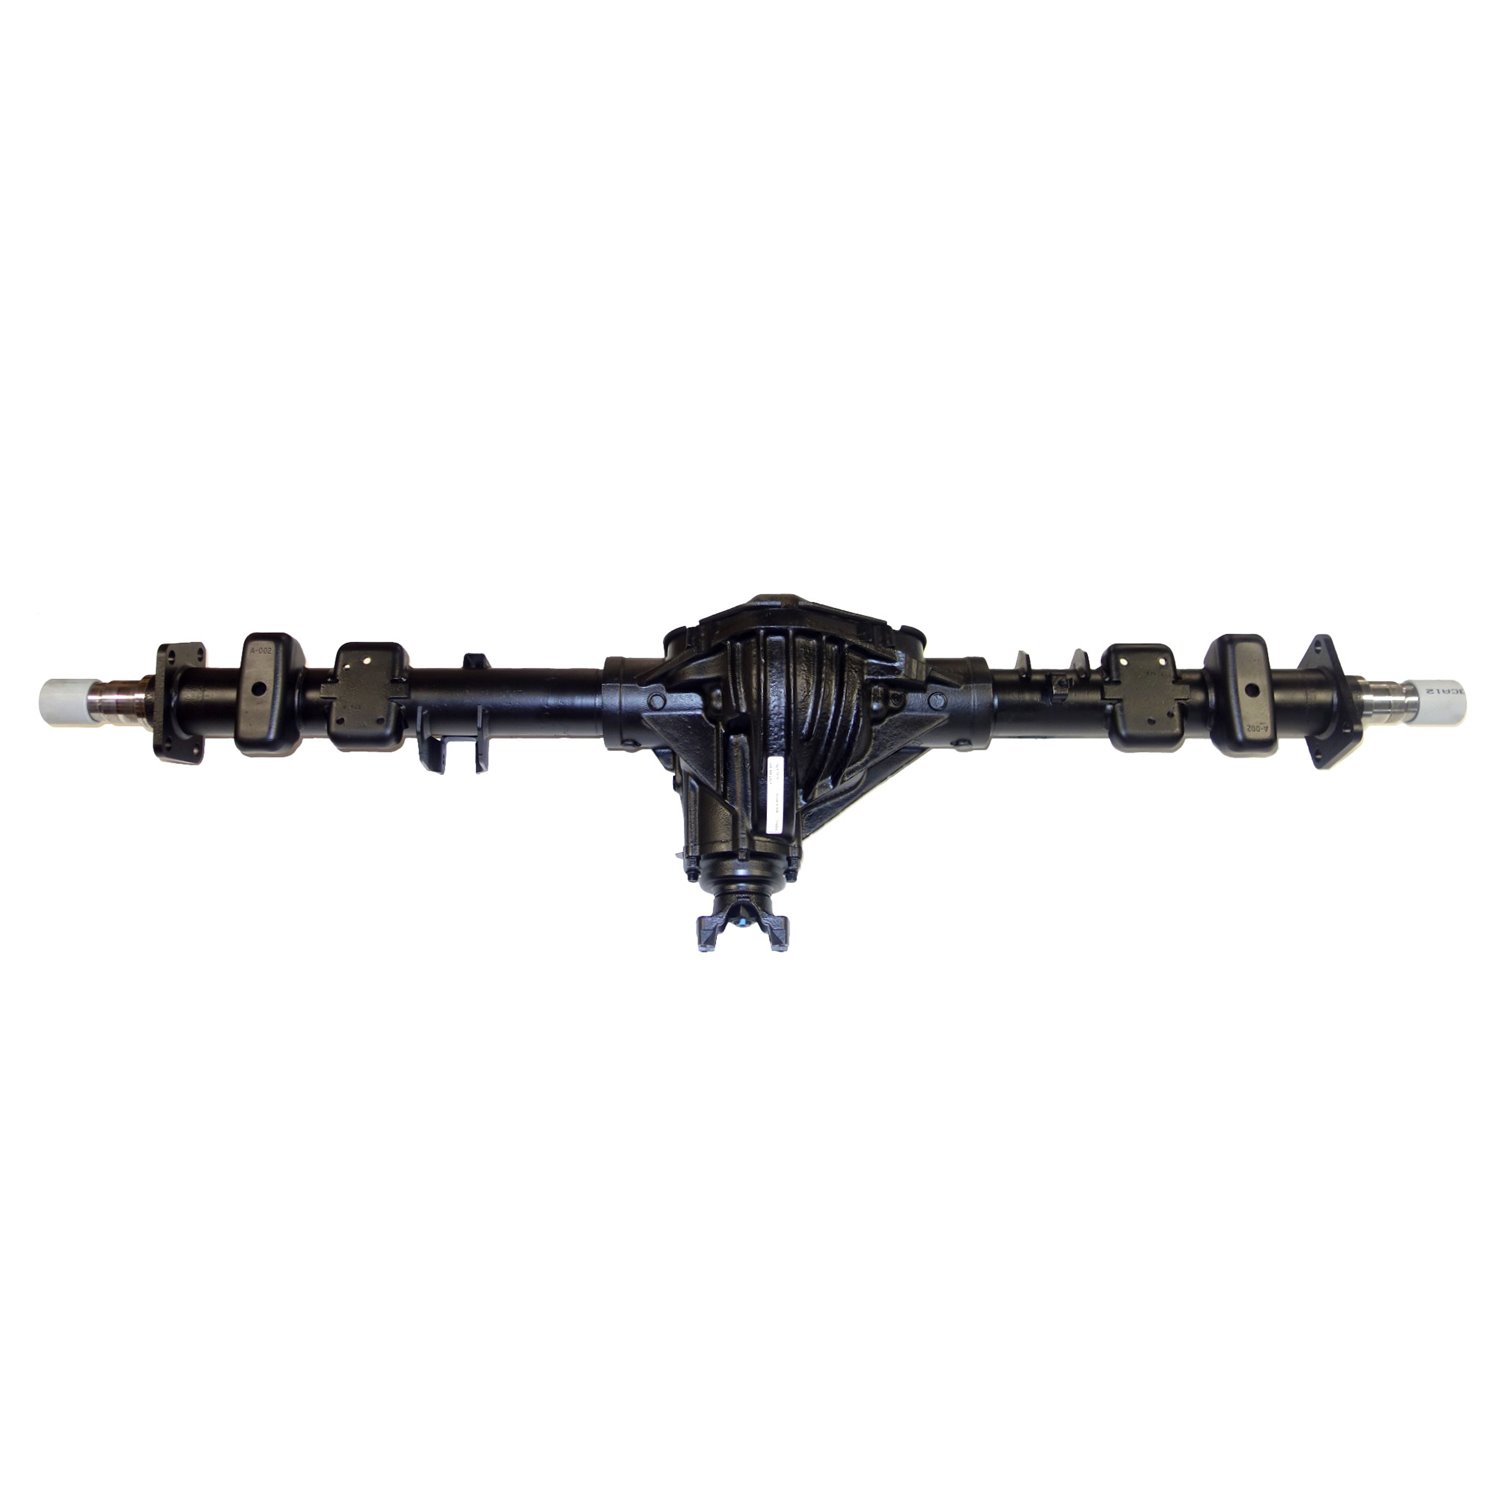 Remanufactured Complete Axle Assembly for GM 14 Bolt Truck 99-05 GM 1506 3.73 Ratio